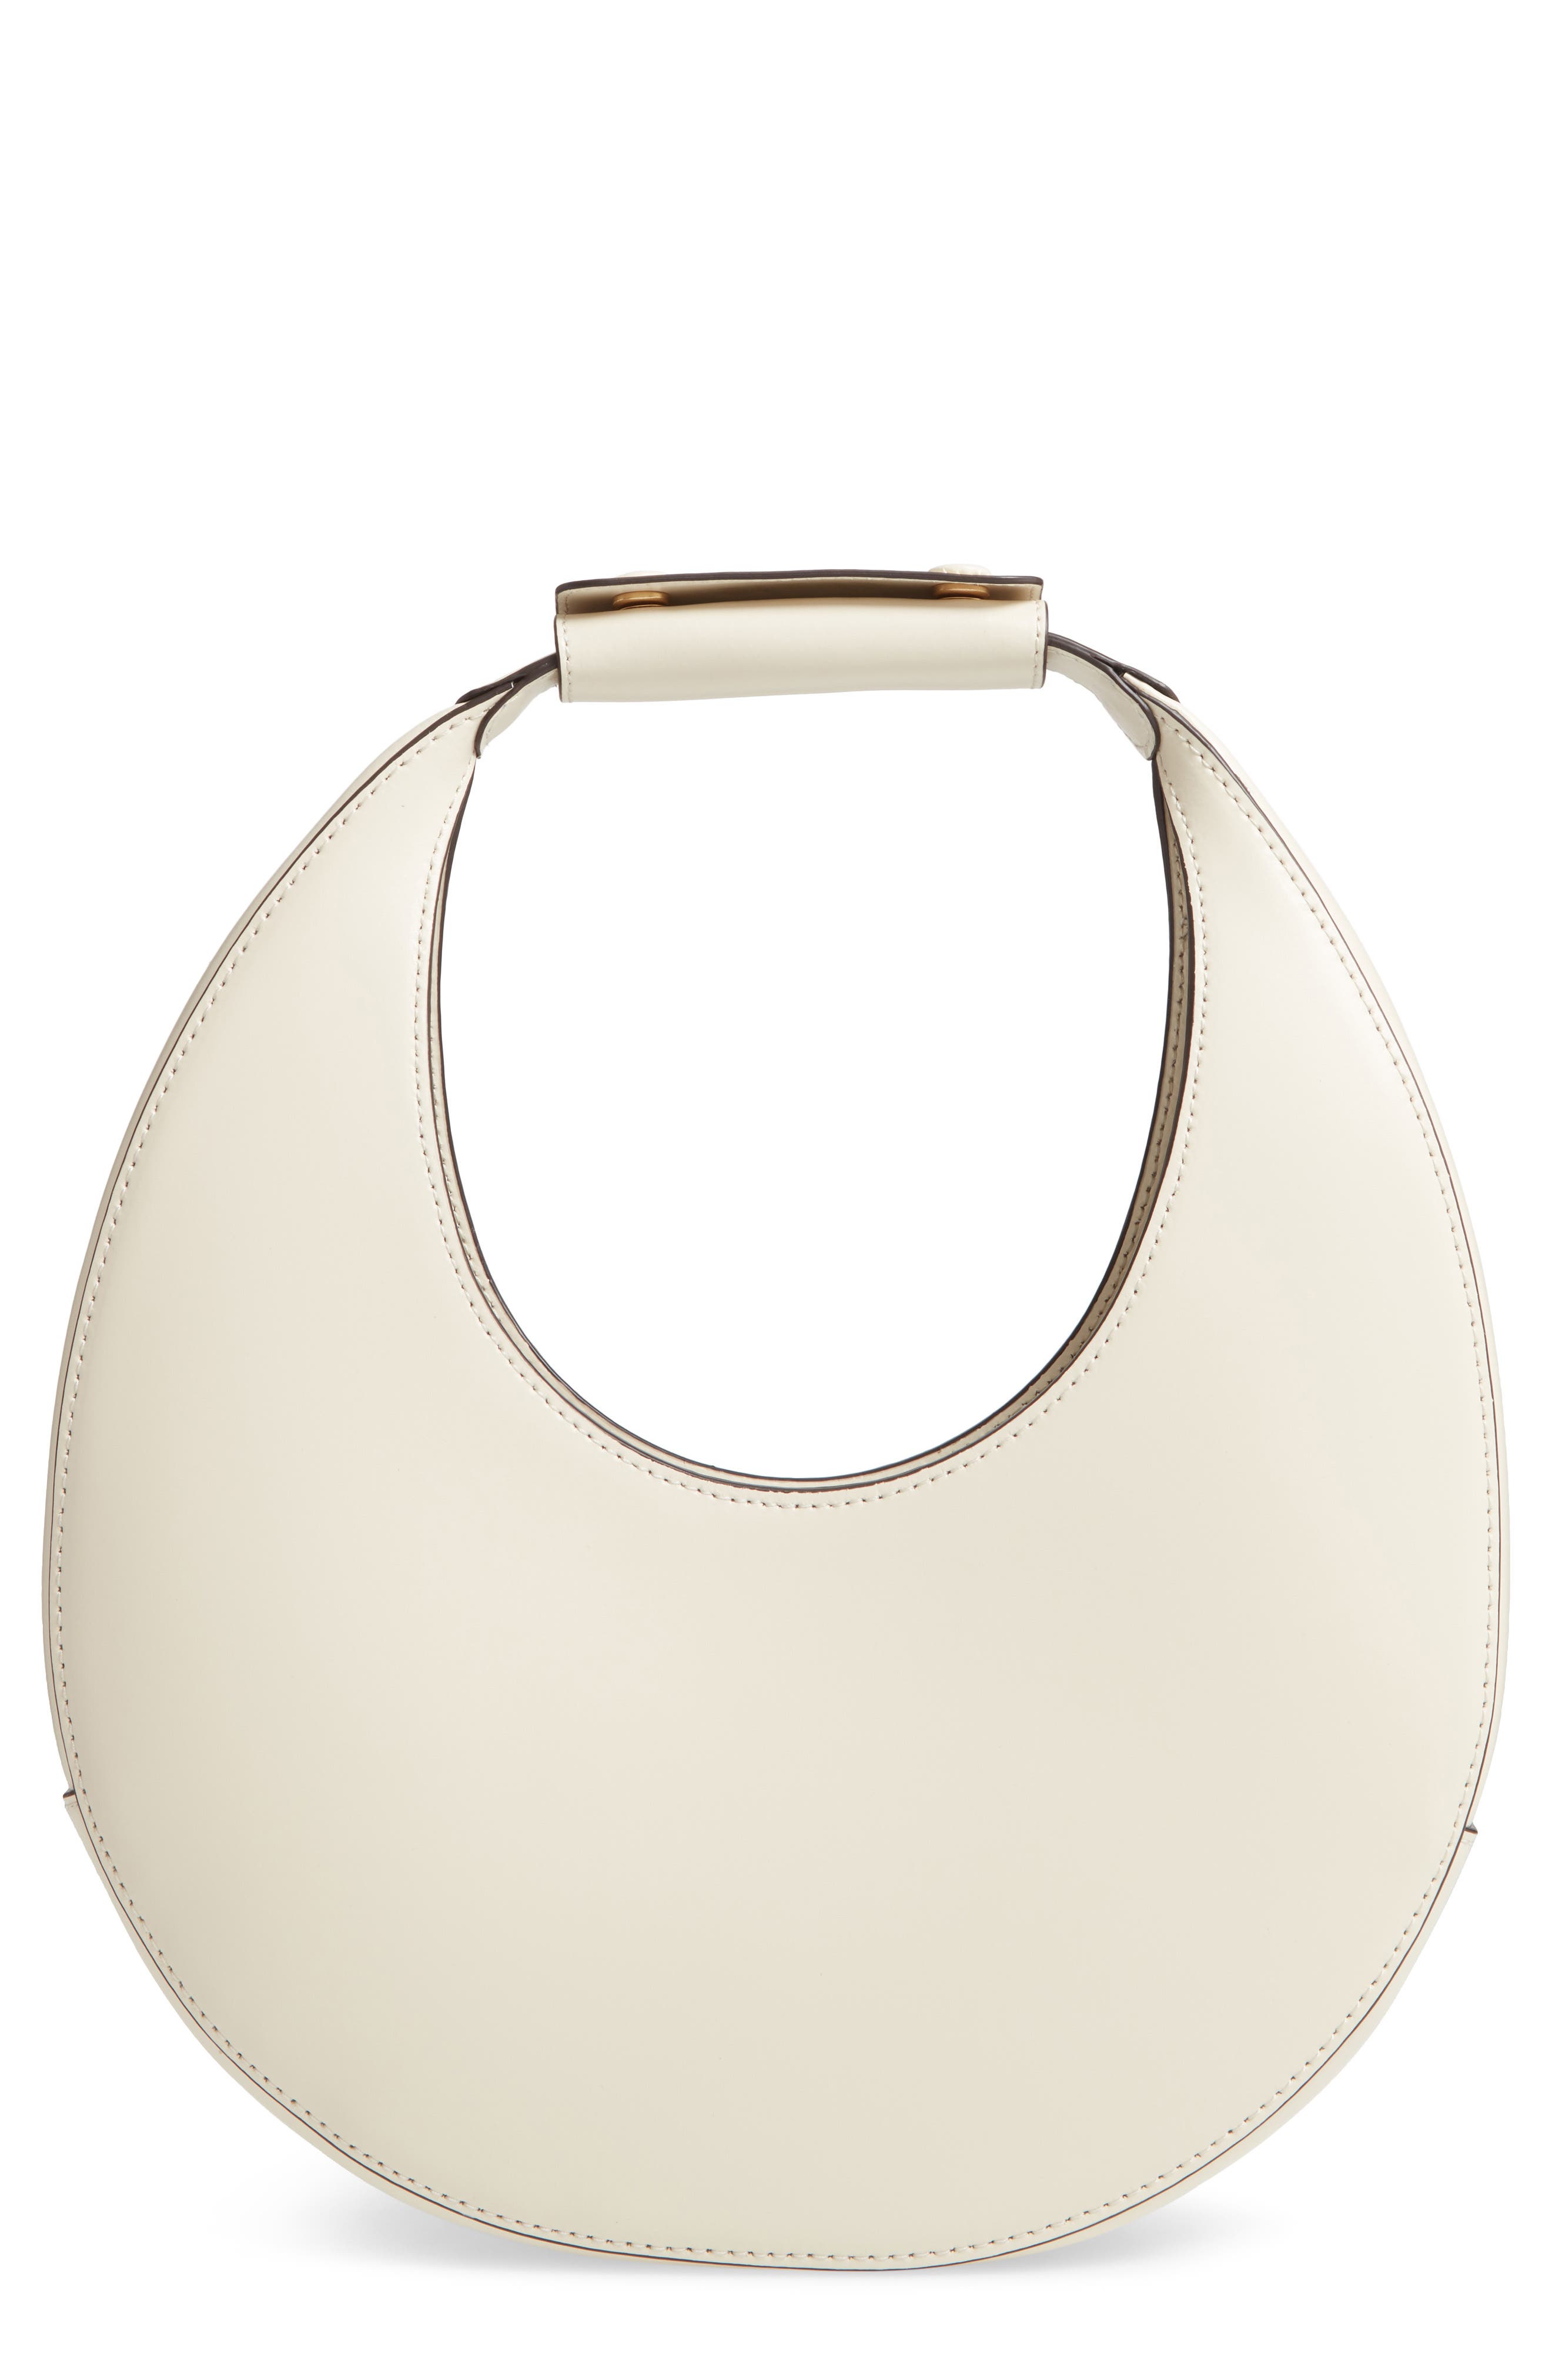 STAUD Leather Moon Bag in Cream at Nordstrom